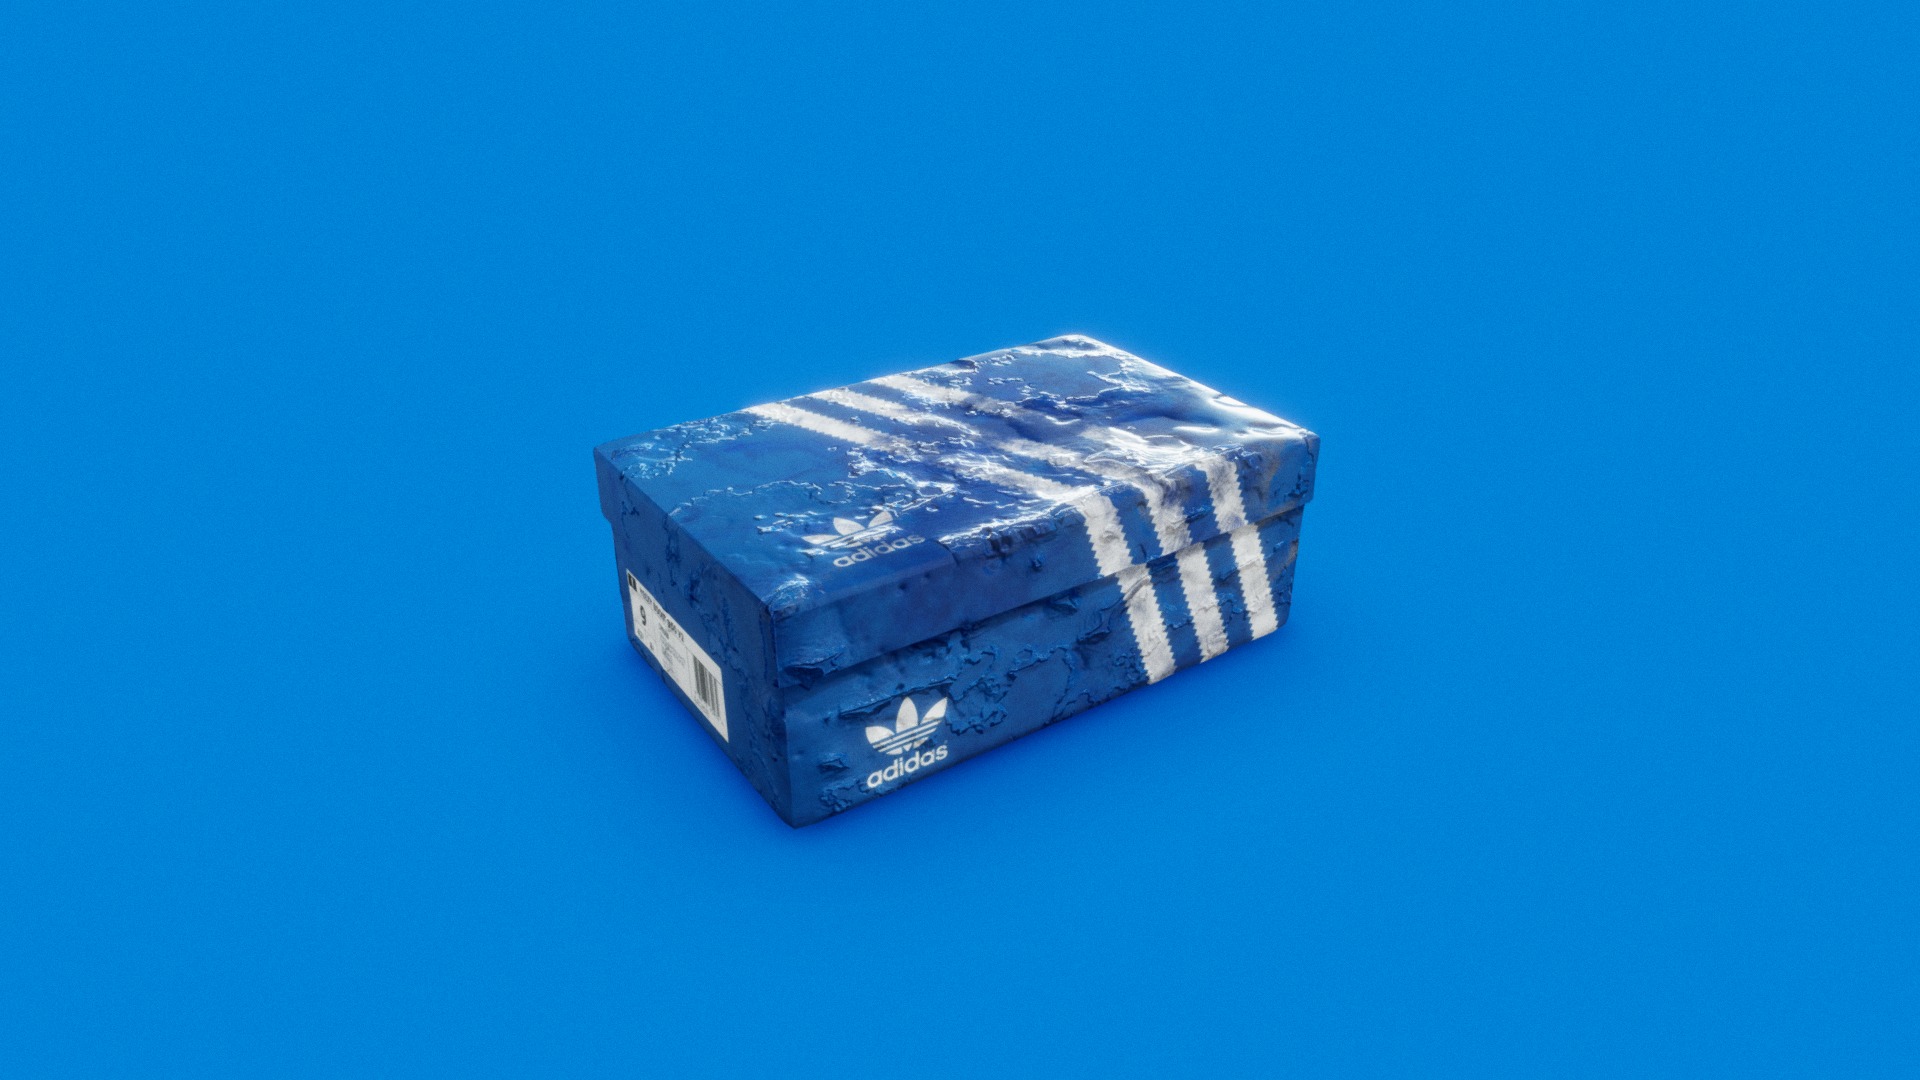 3D model Rusty Adidas Shoe box - This is a 3D model of the Rusty Adidas Shoe box. The 3D model is about a cube with a blue background.